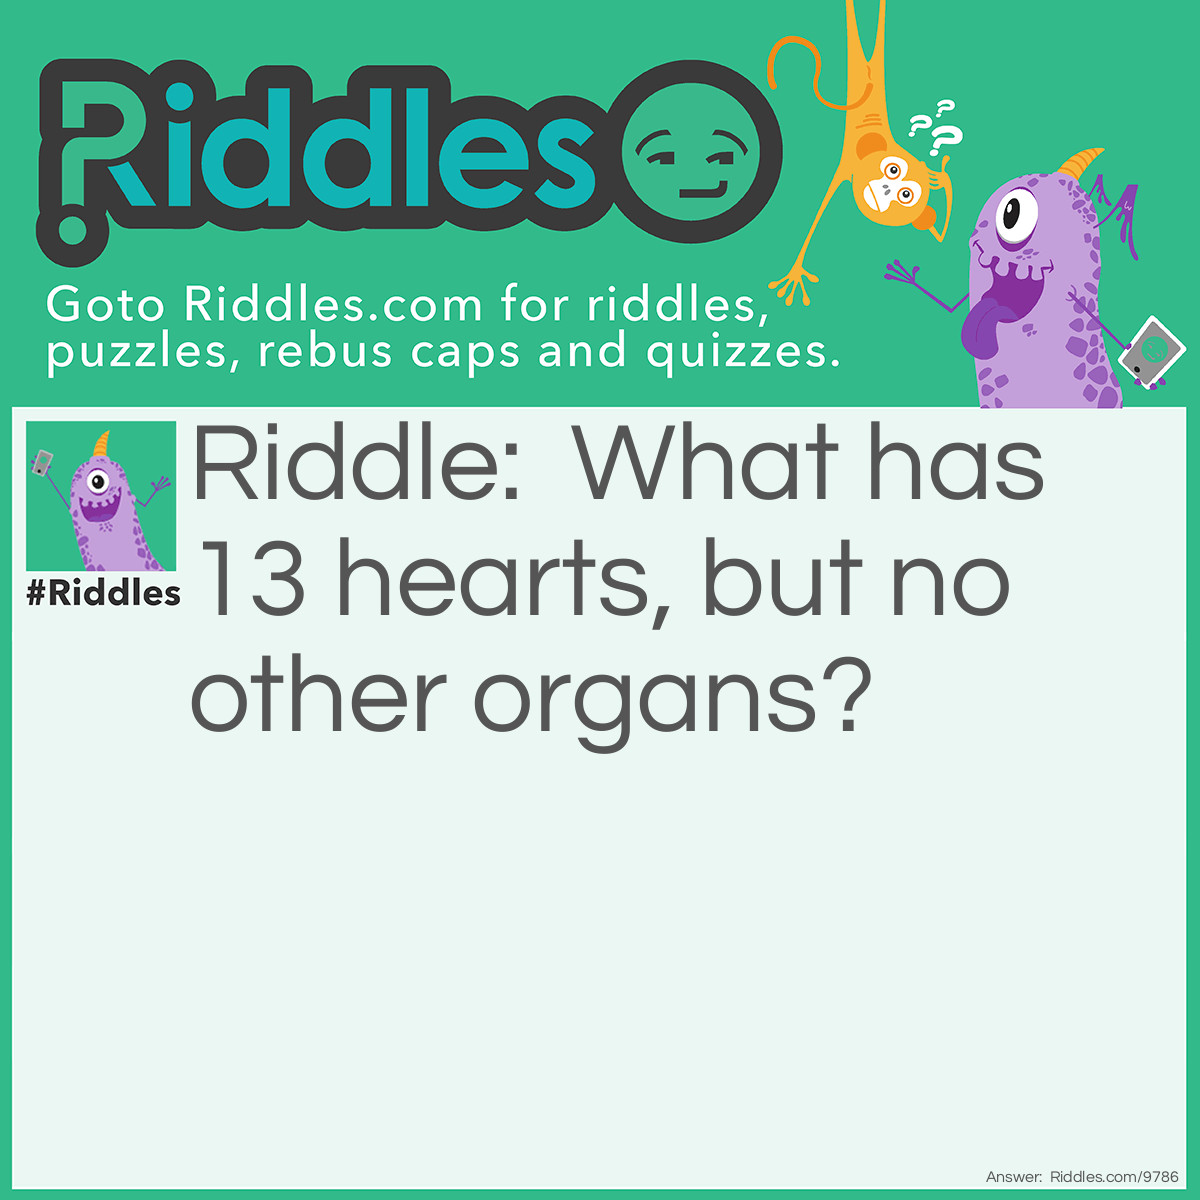 Riddle: What has 13 hearts, but no other organs? Answer: A deck of Cards.